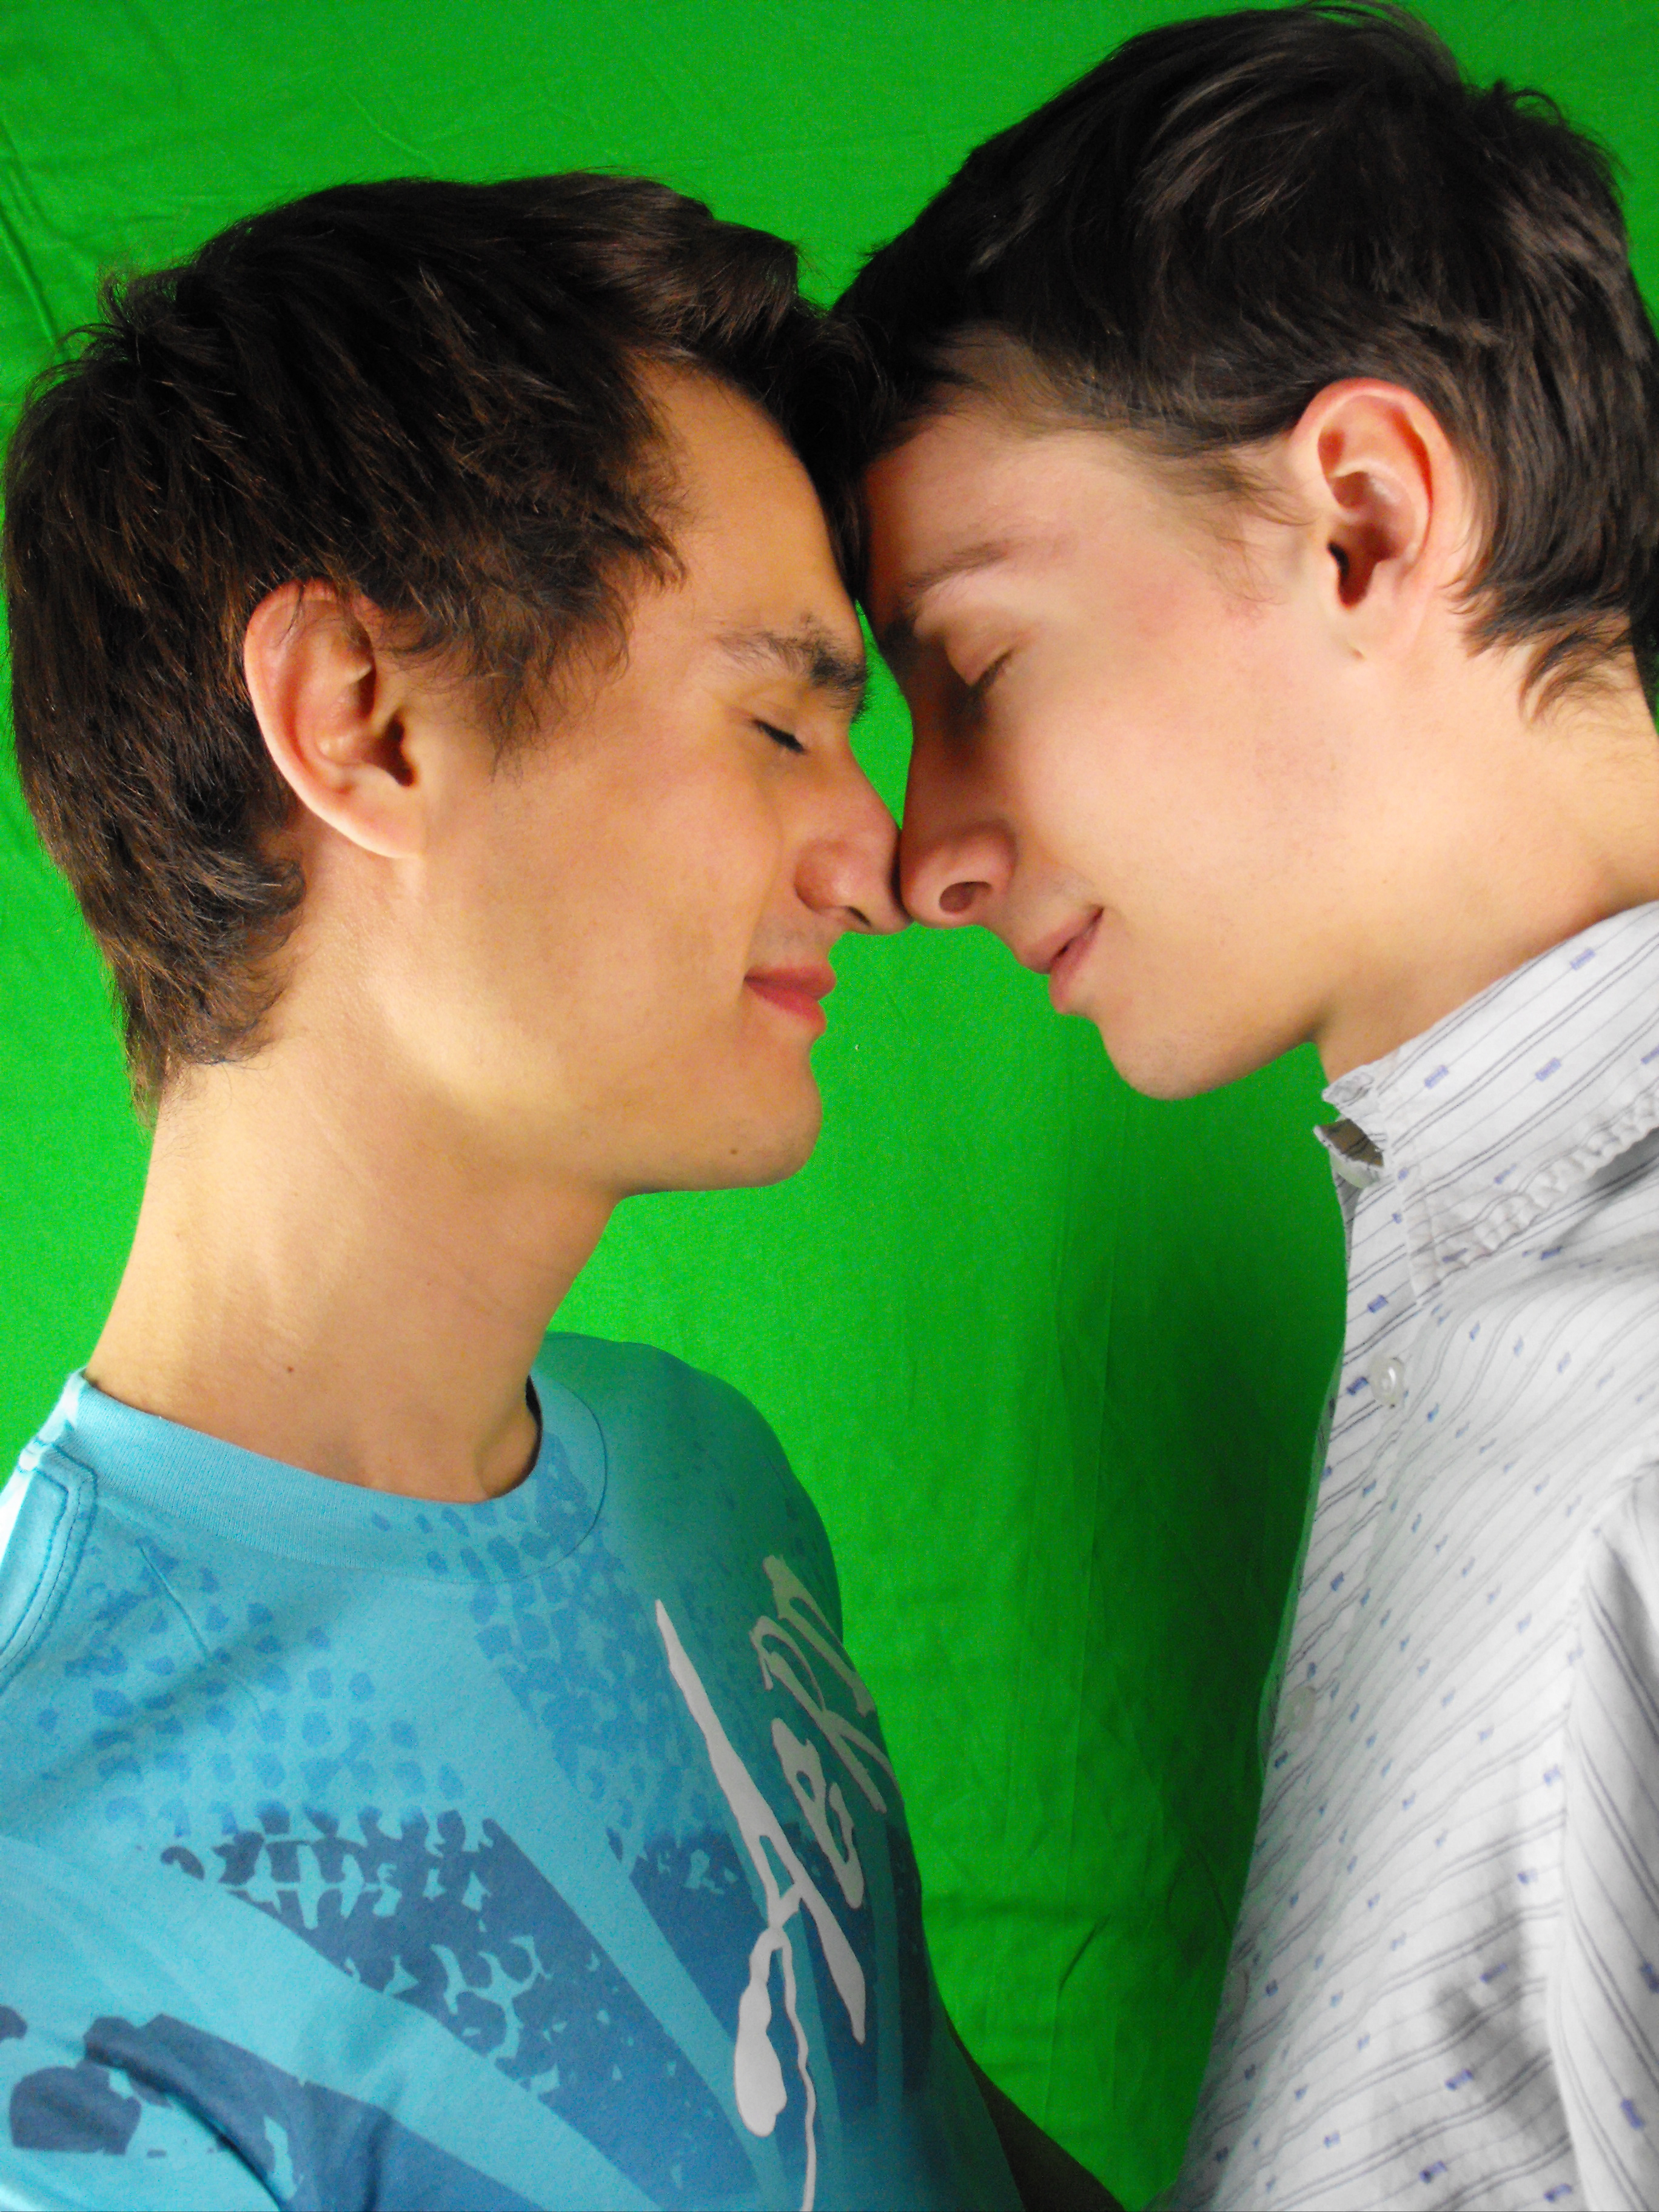 Kiss between a gay couple in love by Michela Ravasio 